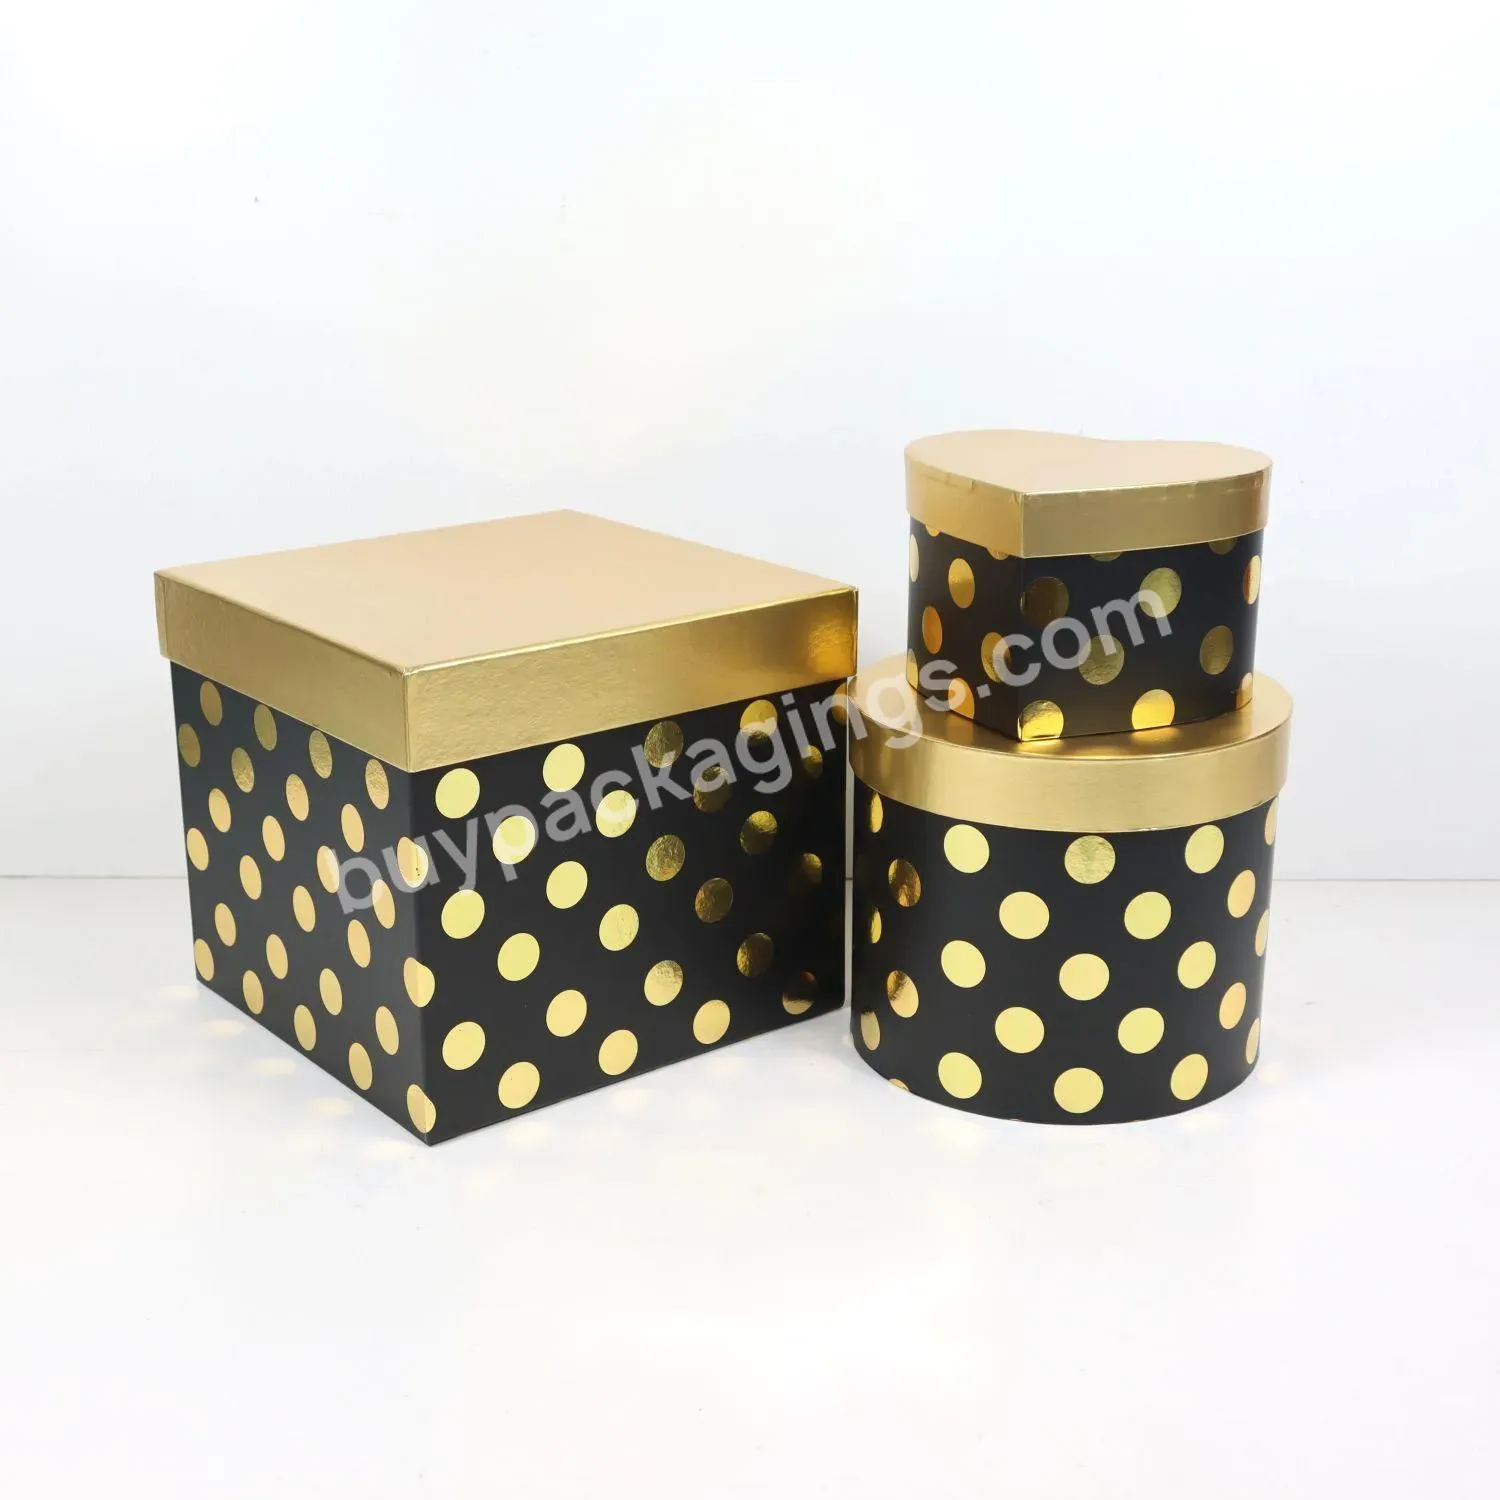 Wholesale Cylindrical Square Heart Shaped 3pcs/set Flower Gift Paper Box For Flower Gift Packaging - Buy Cylindrical Square Heart Shaped 3pcs/set Paper Box,Flower Gift Paper Box,Paper Box For Flower Gift Packaging.